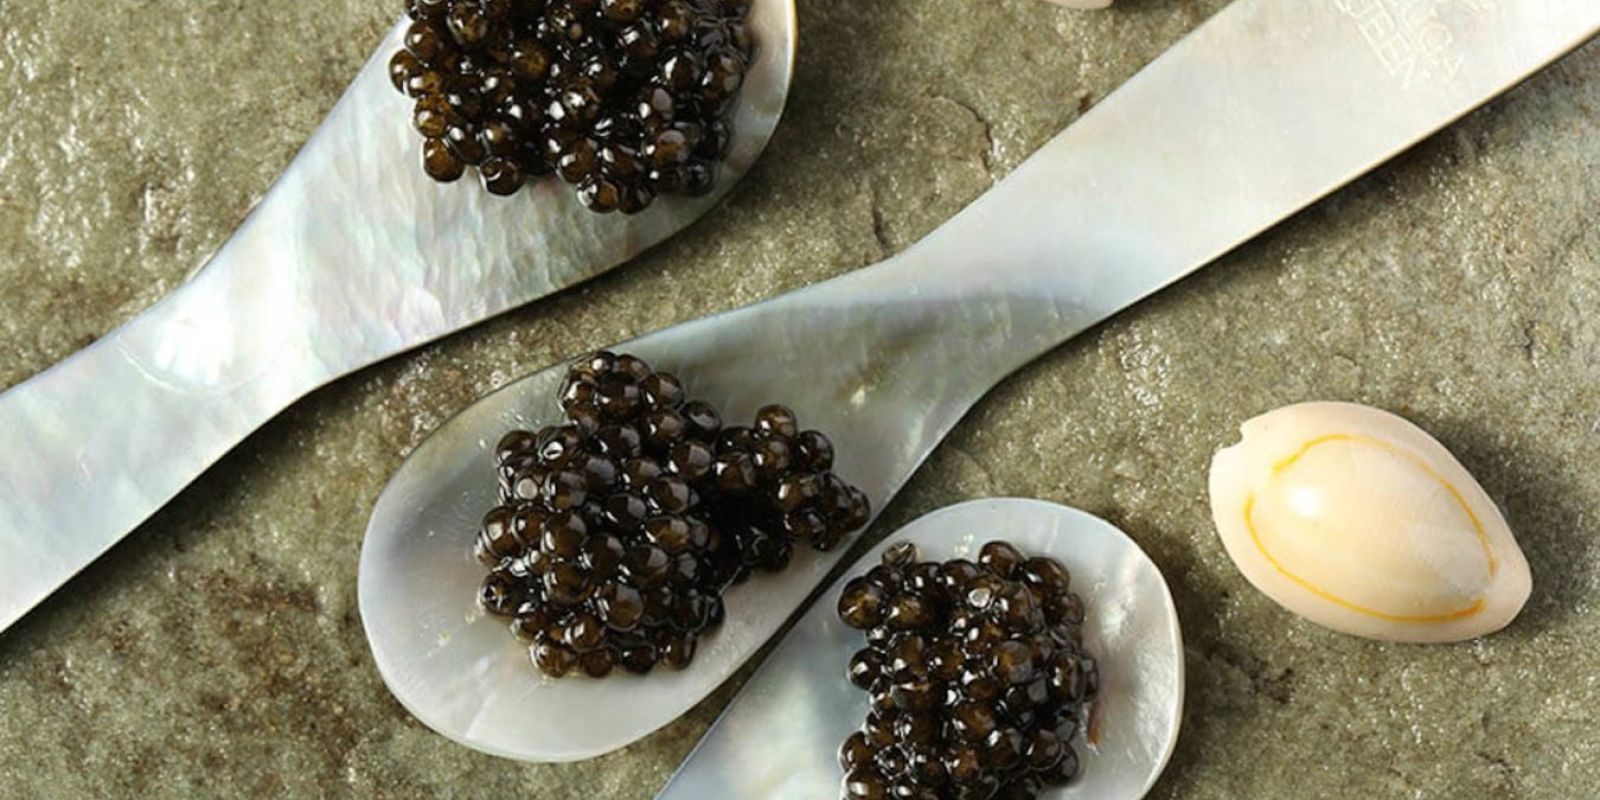 Here Is What Caviar Can Do For Your Hair admin ajax.php?action=kernel&p=image&src=%7B%22file%22%3A%22wp content%2Fuploads%2F2020%2F09%2Fpurcorganics caviar hair treatment